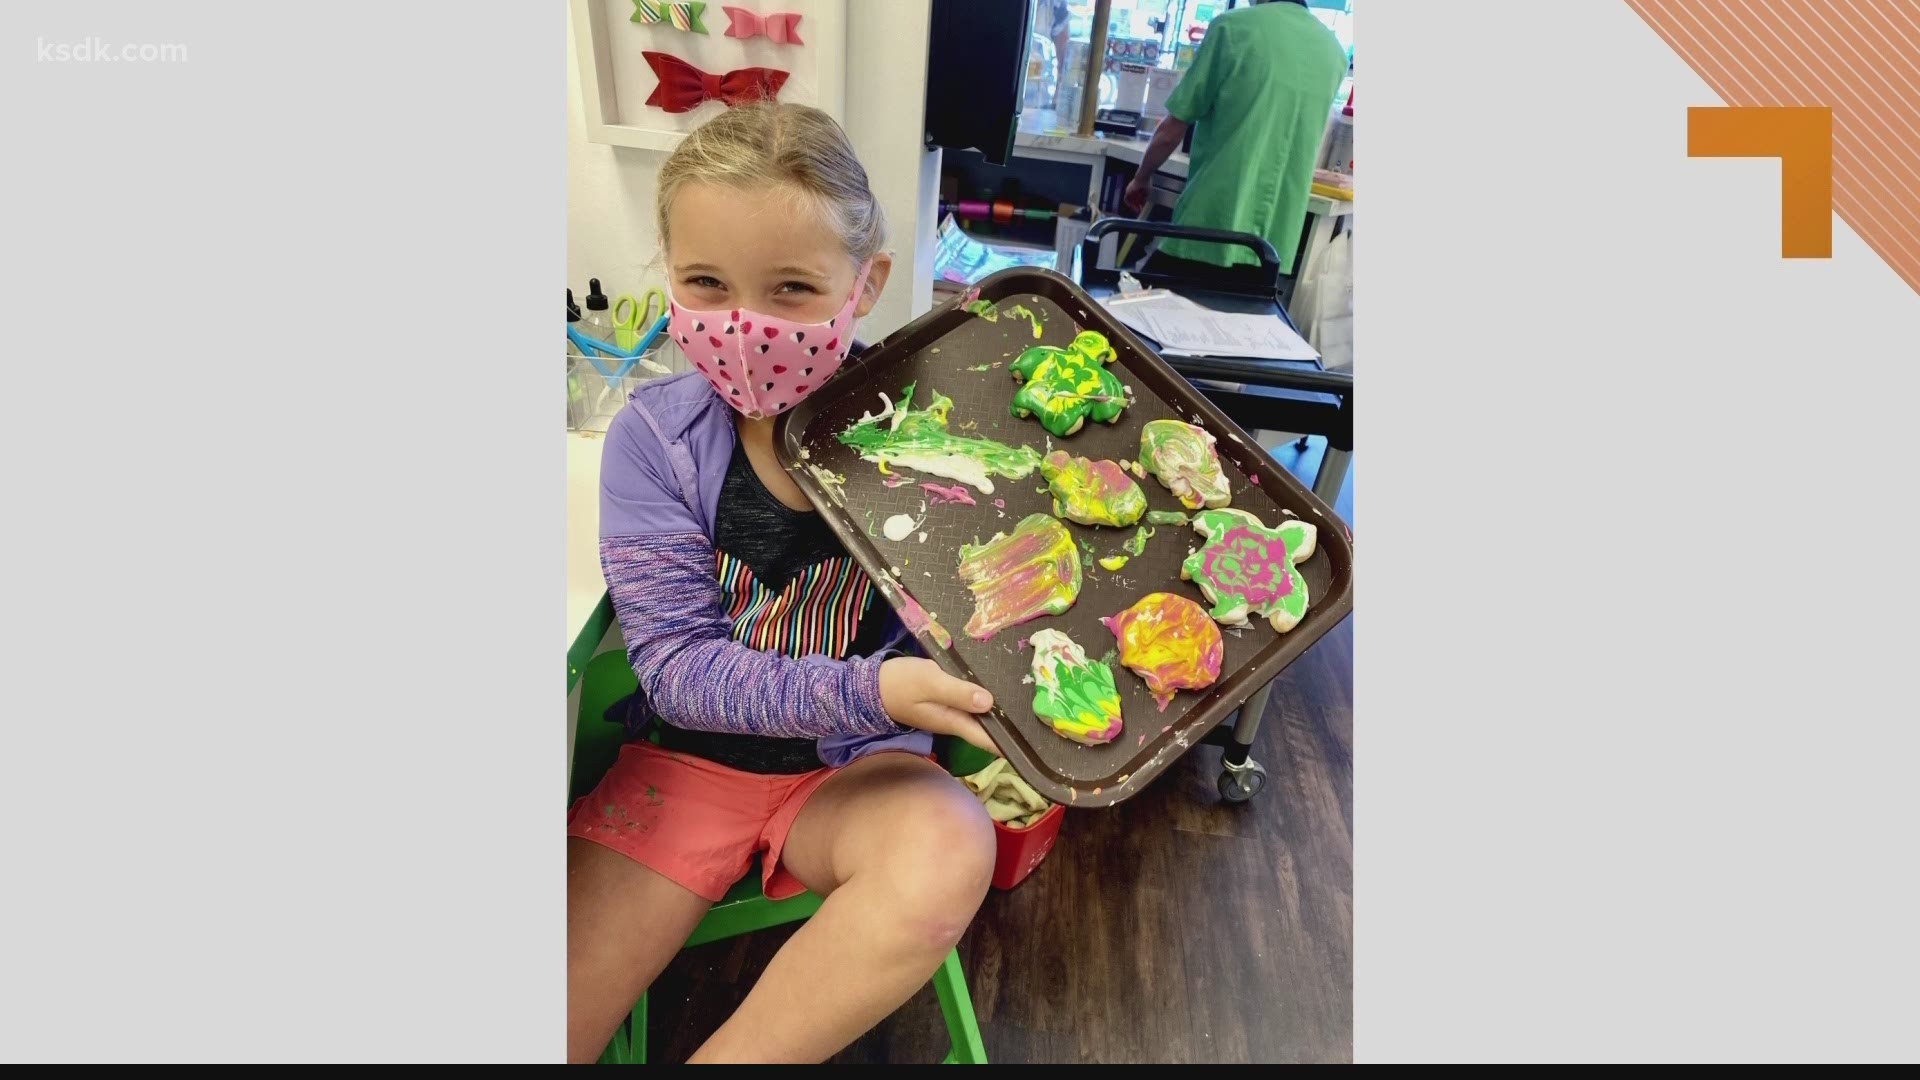 There are all sorts of decorating kits that kids can enjoy for St. Patrick’s Day for cookies or cakes.